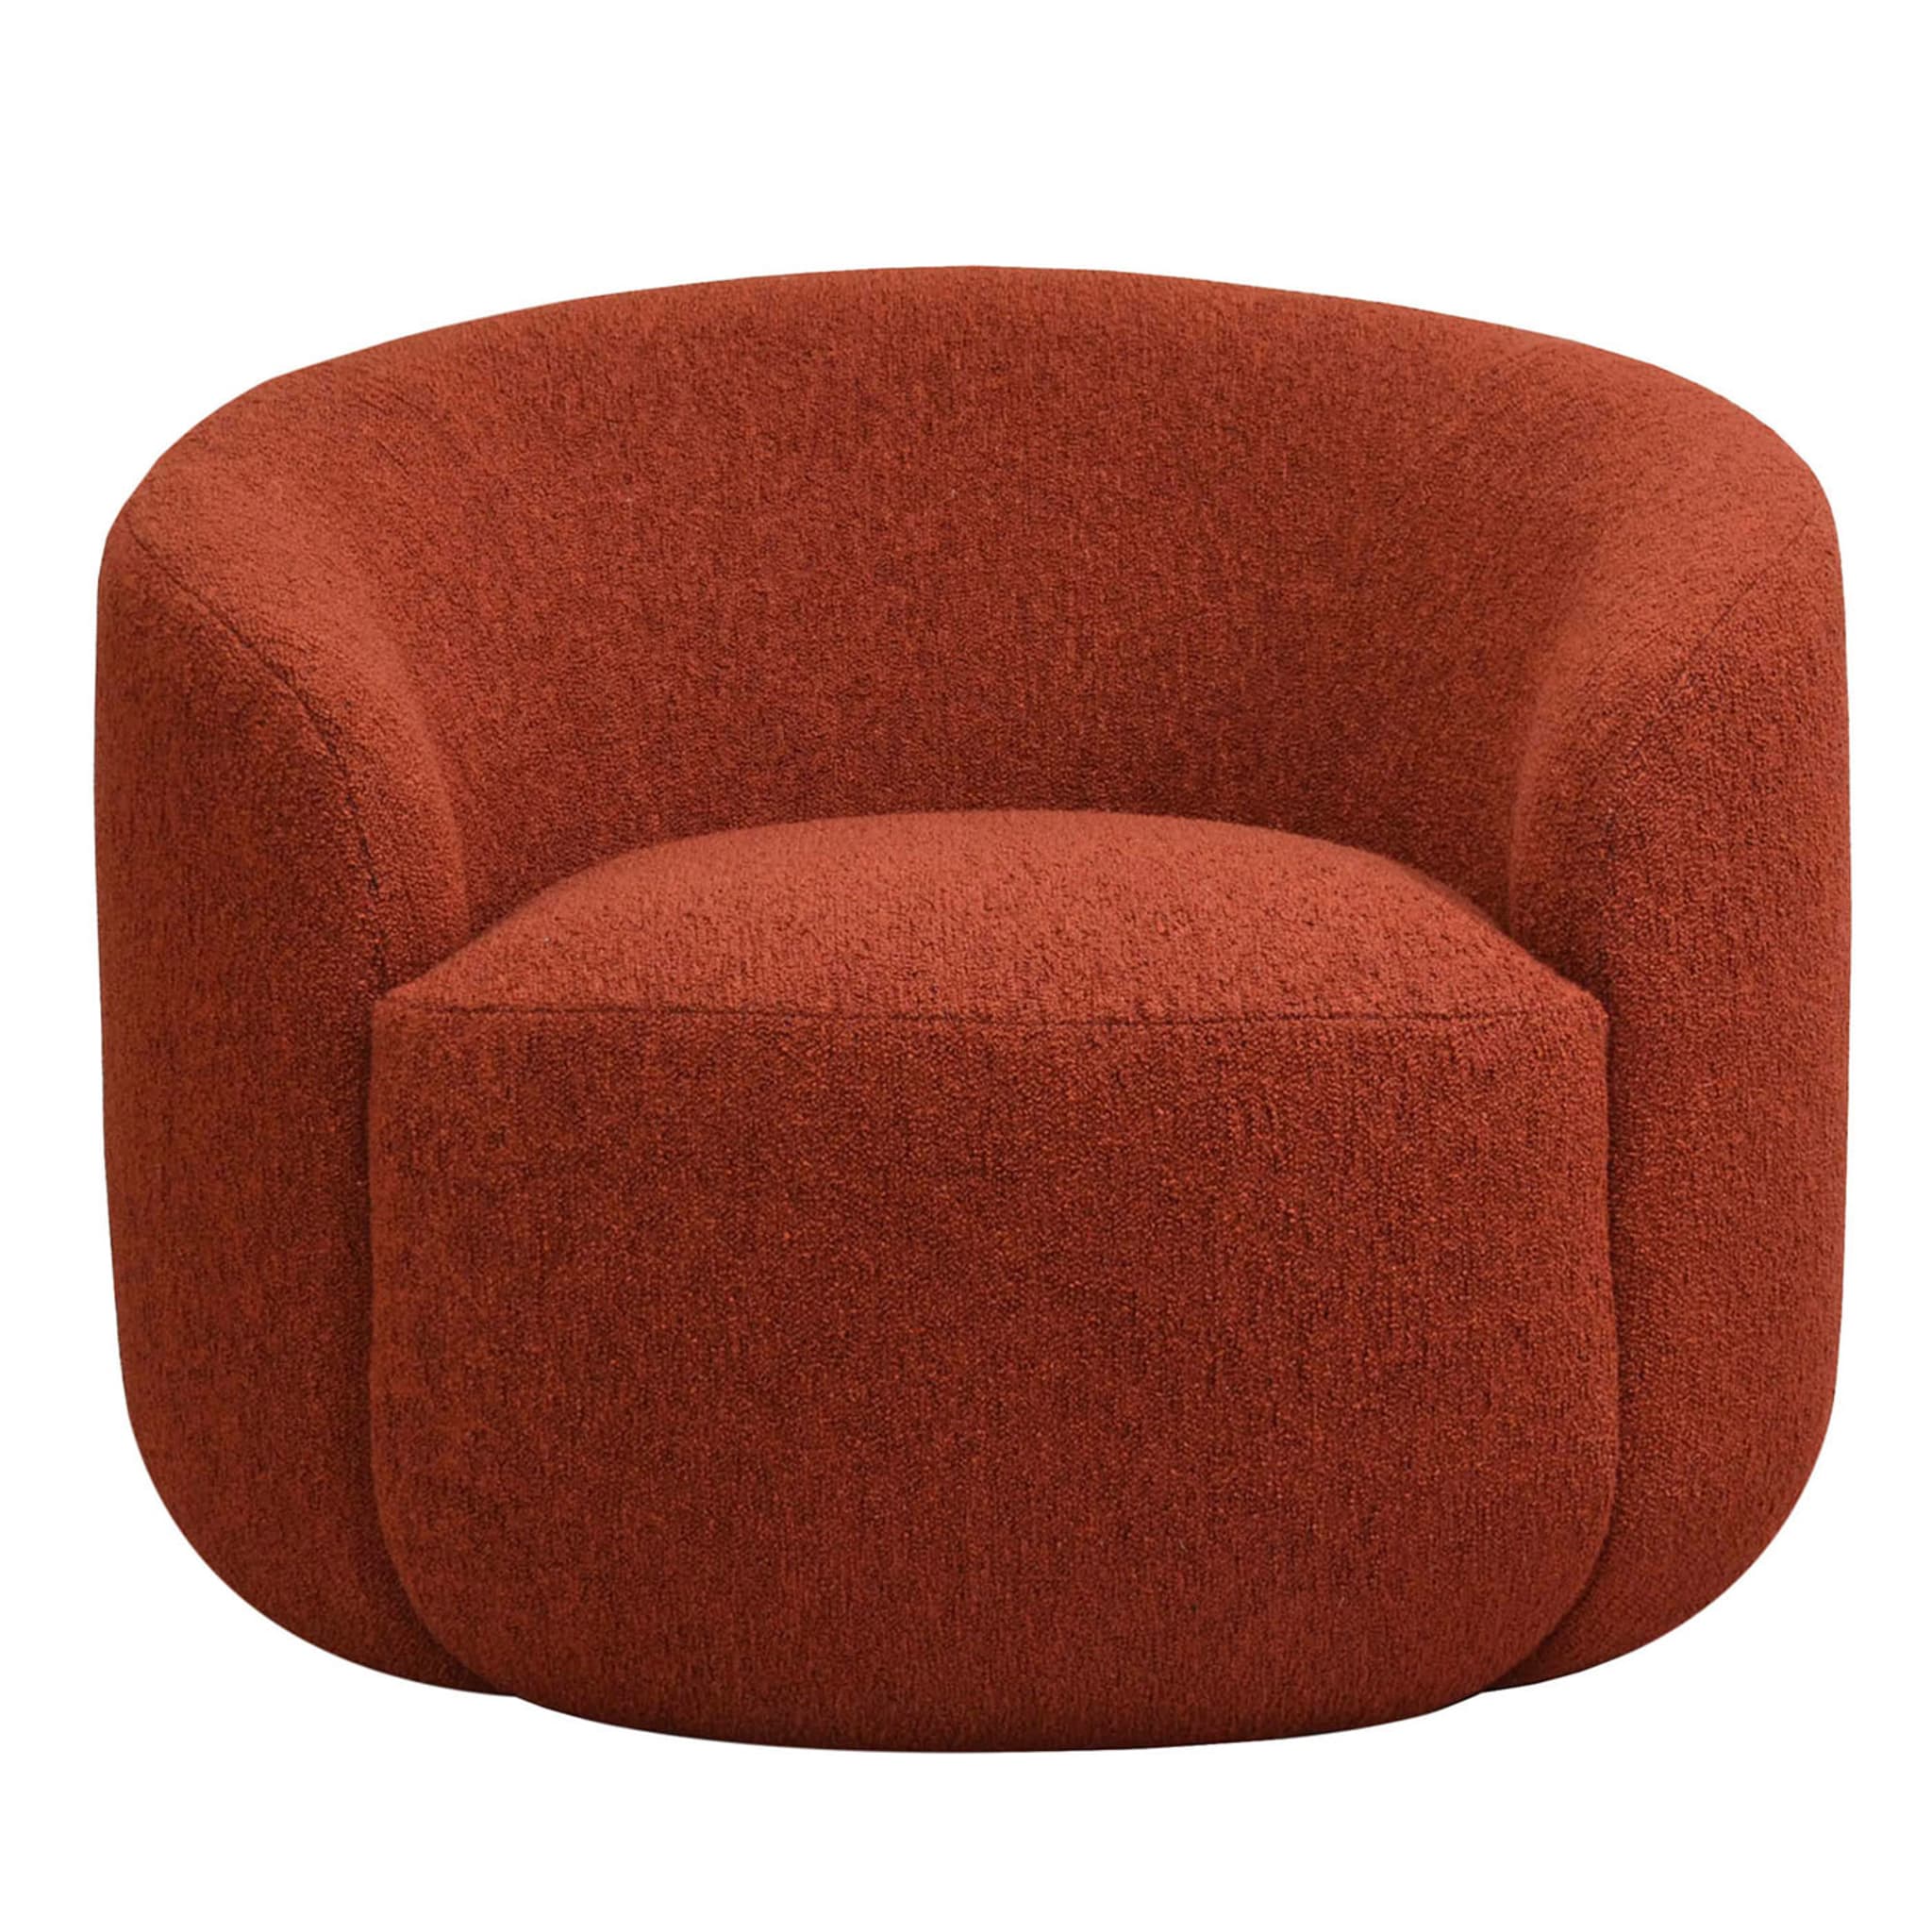 Cottonflower Lounge Armchair in Red Terracotta Fabric - Main view